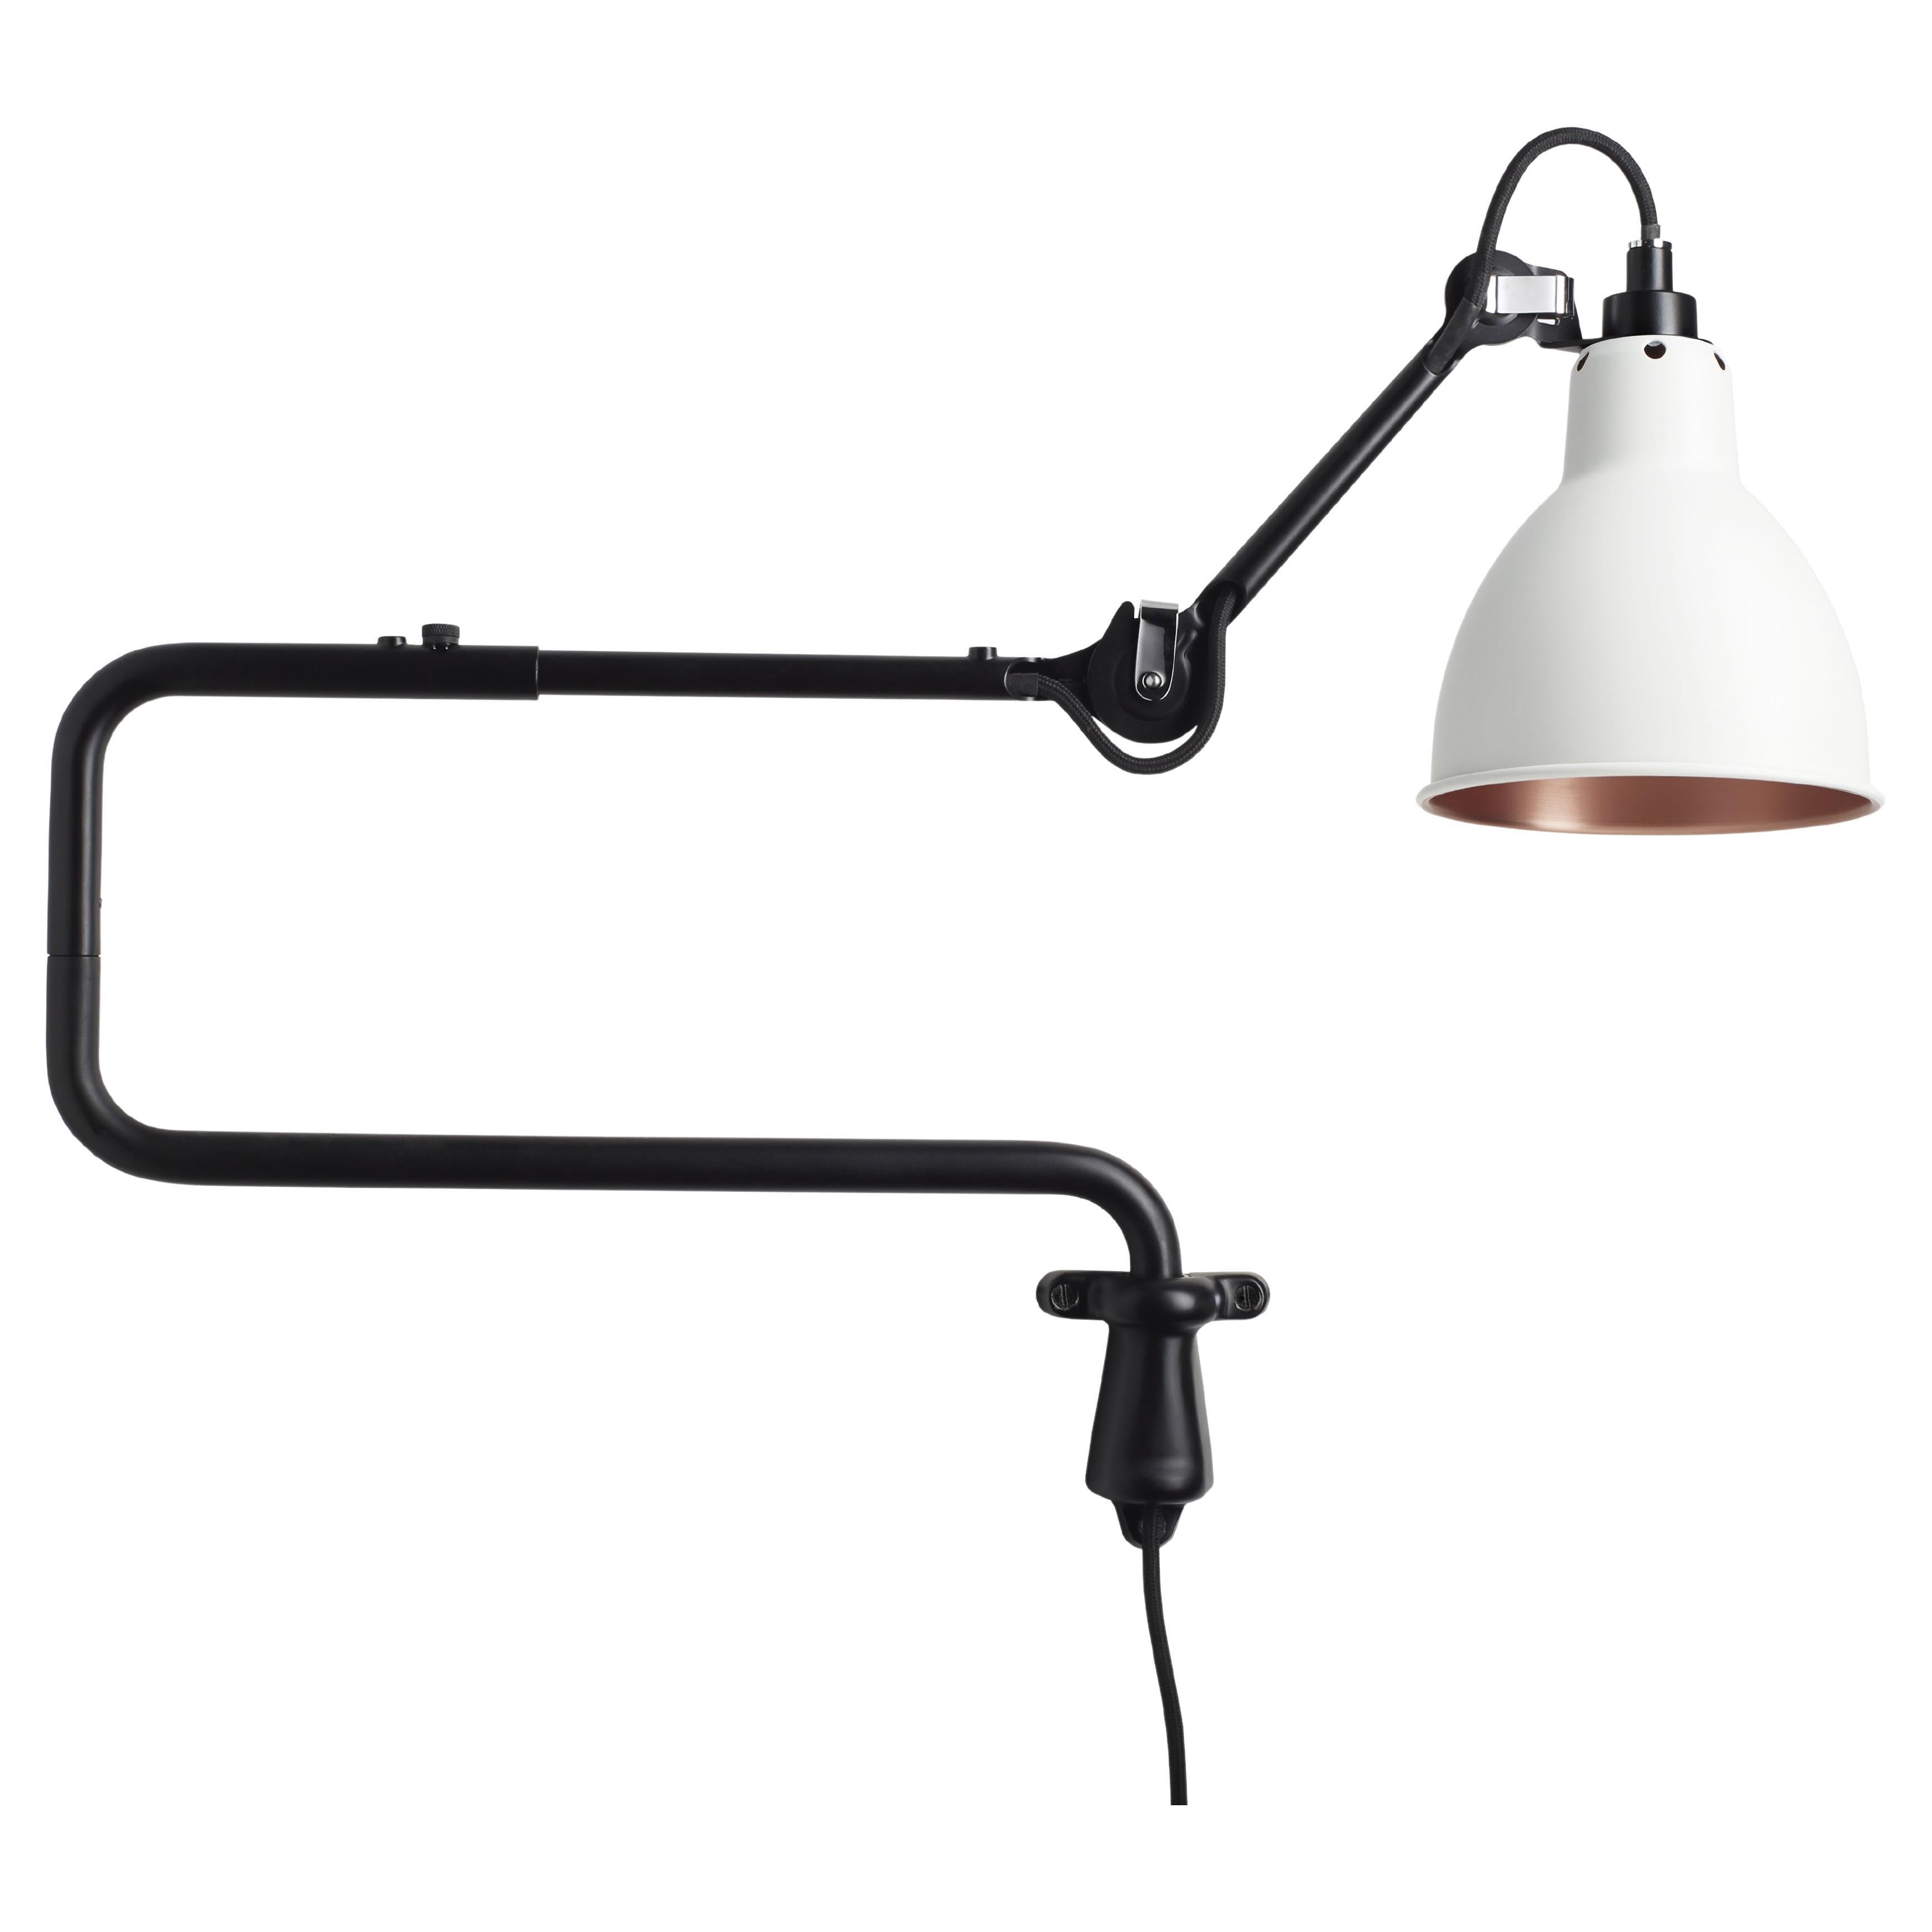 DCW Editions La Lampe Gras N°303 Wall Lamp in Black Arm and White Copper Shade